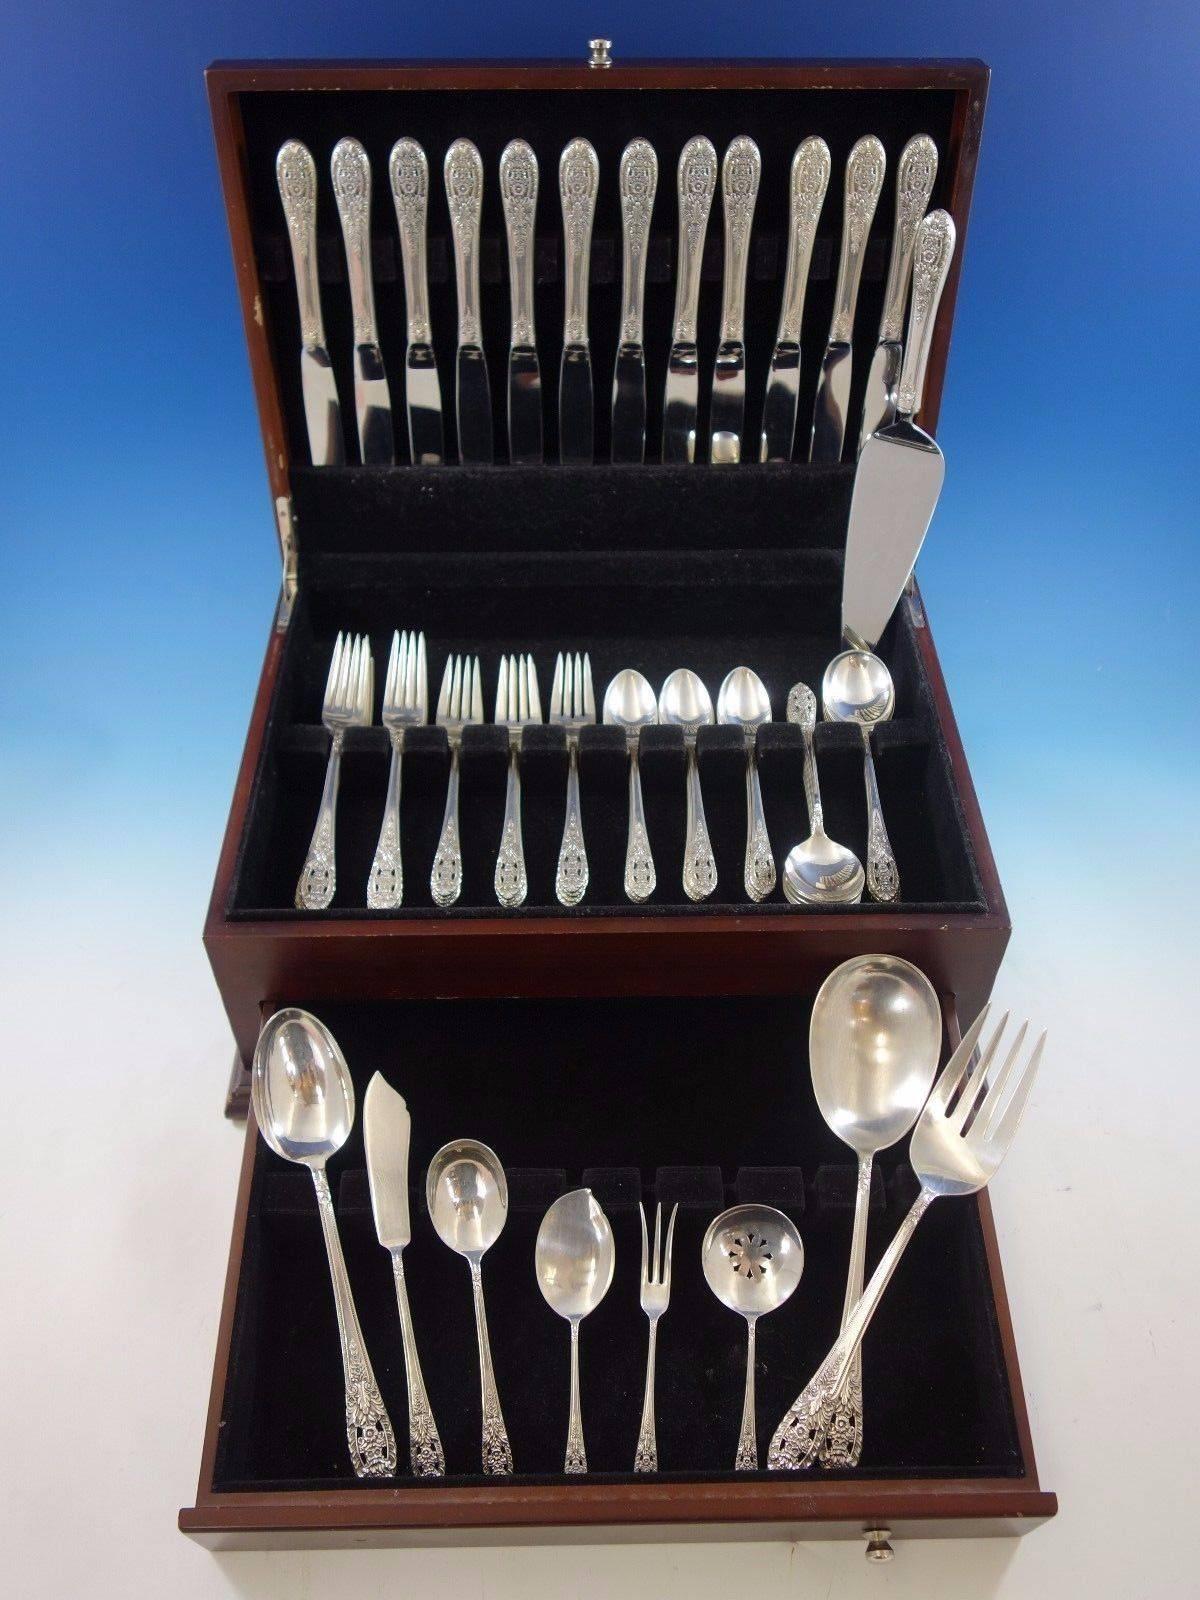 Crown Princess by Fine Arts International sterling silver flatware set, 69 pieces. This set includes: 

12 knives, 9 1/4